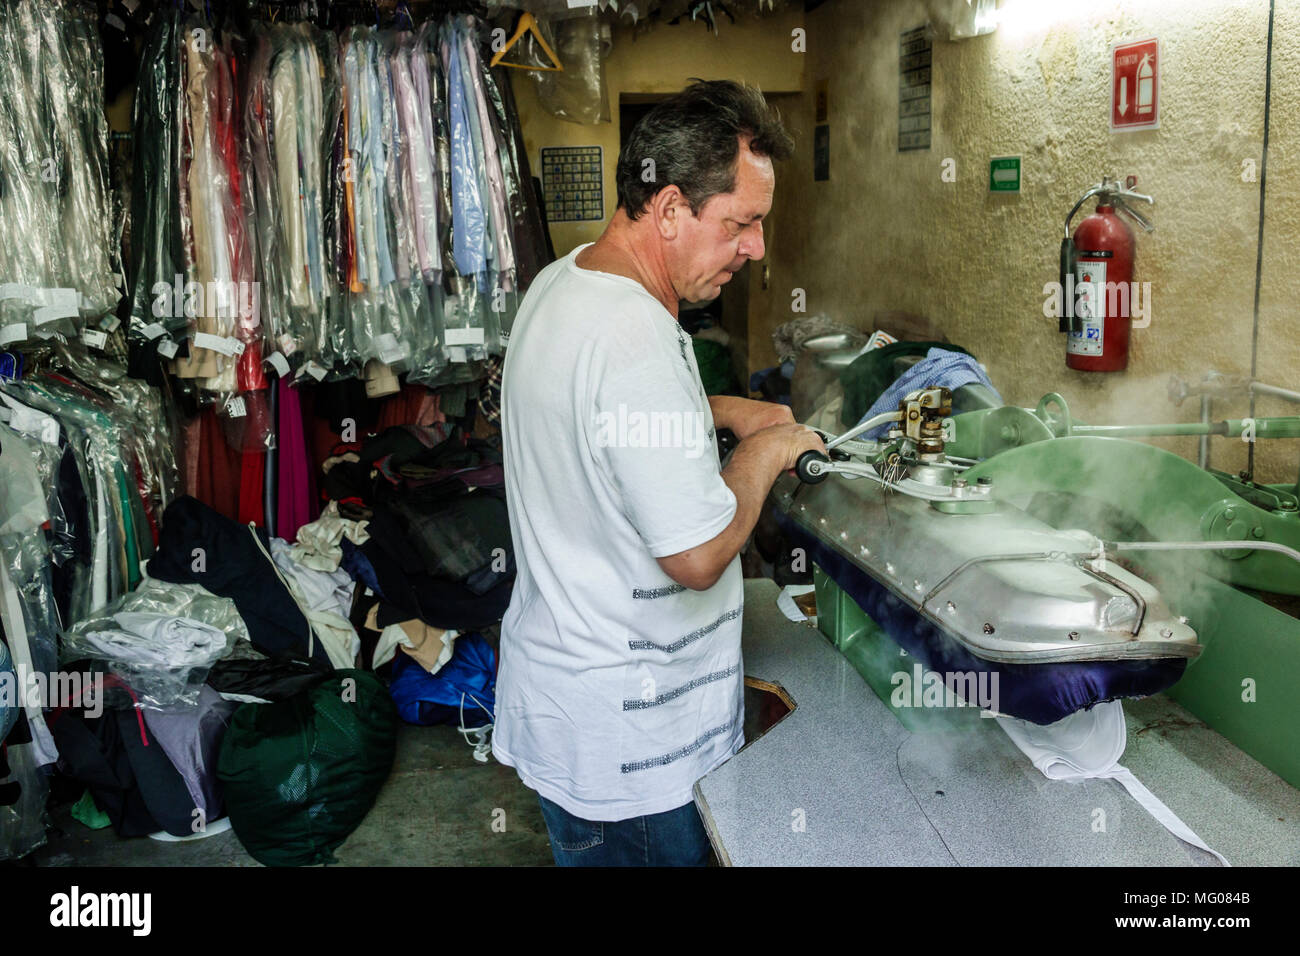 Mexico City,Cuauhtemoc,Mexican,Hispanic,historic Center Centre,Calle Regina,dry cleaner cleaning,man men male,working,pressing,ironing,steam,manager,e Stock Photo